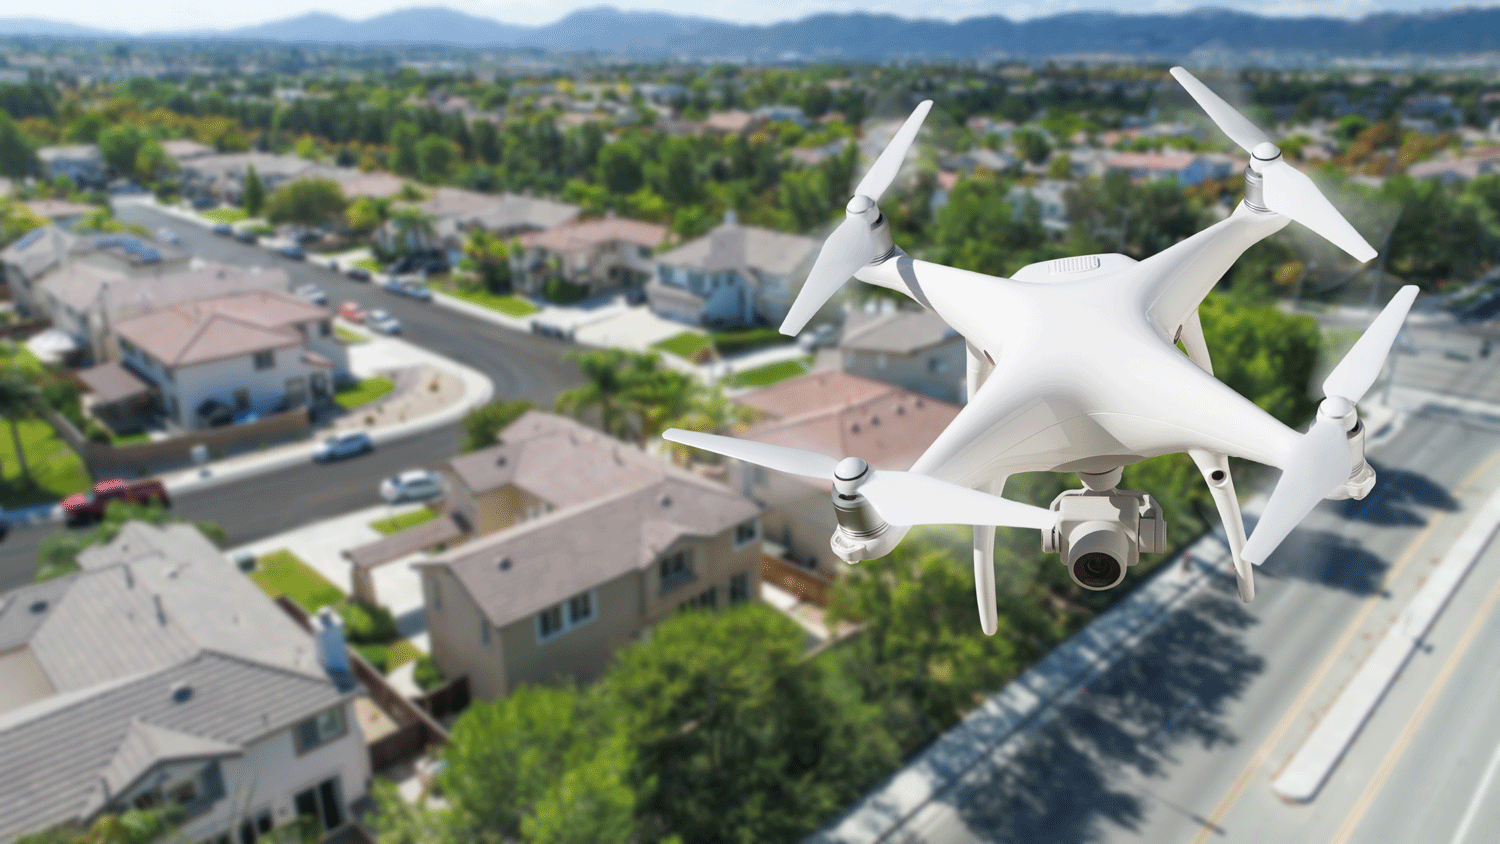 BoxBrownie.com provides aerial edits for drone real estate photography